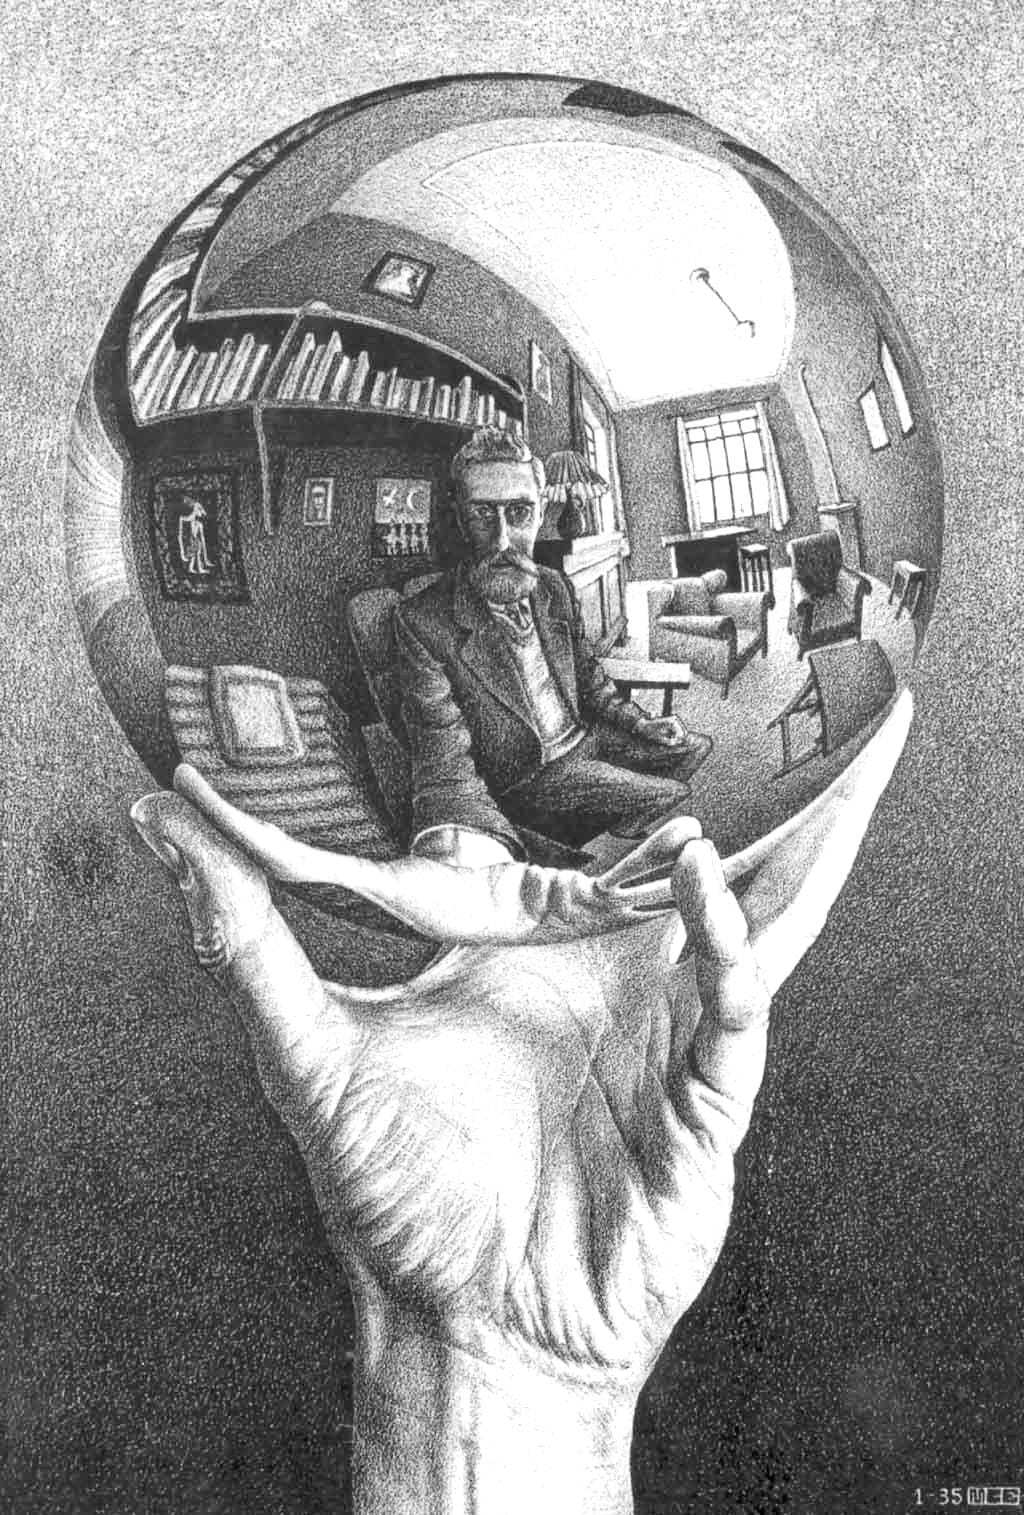 Hand with Reflecting Sphere, 1935 lithograph